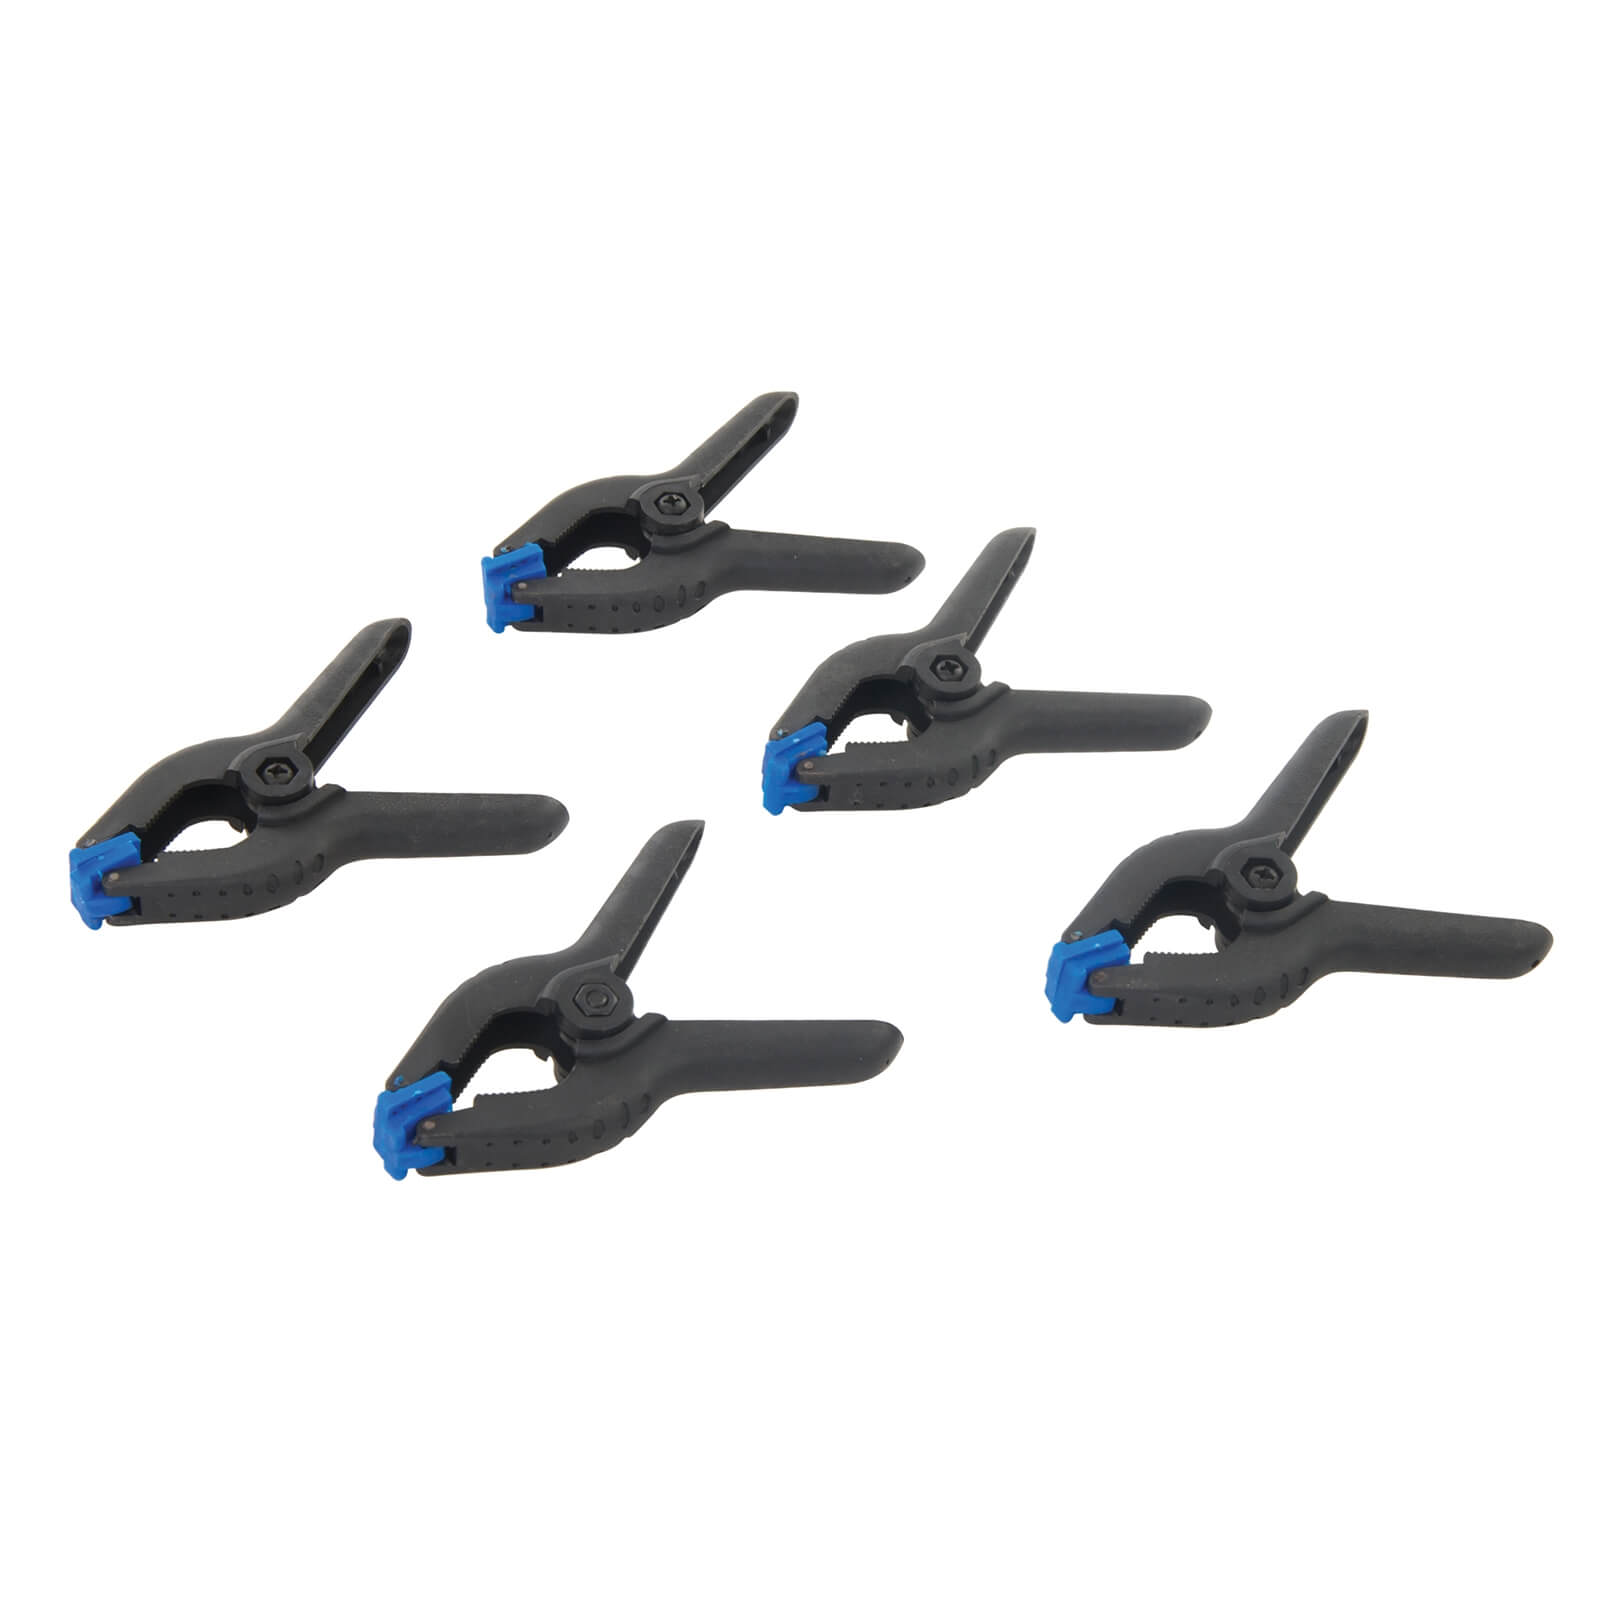 Photo of Silverline Spring Clamps 5pk 100 Mm Jaw